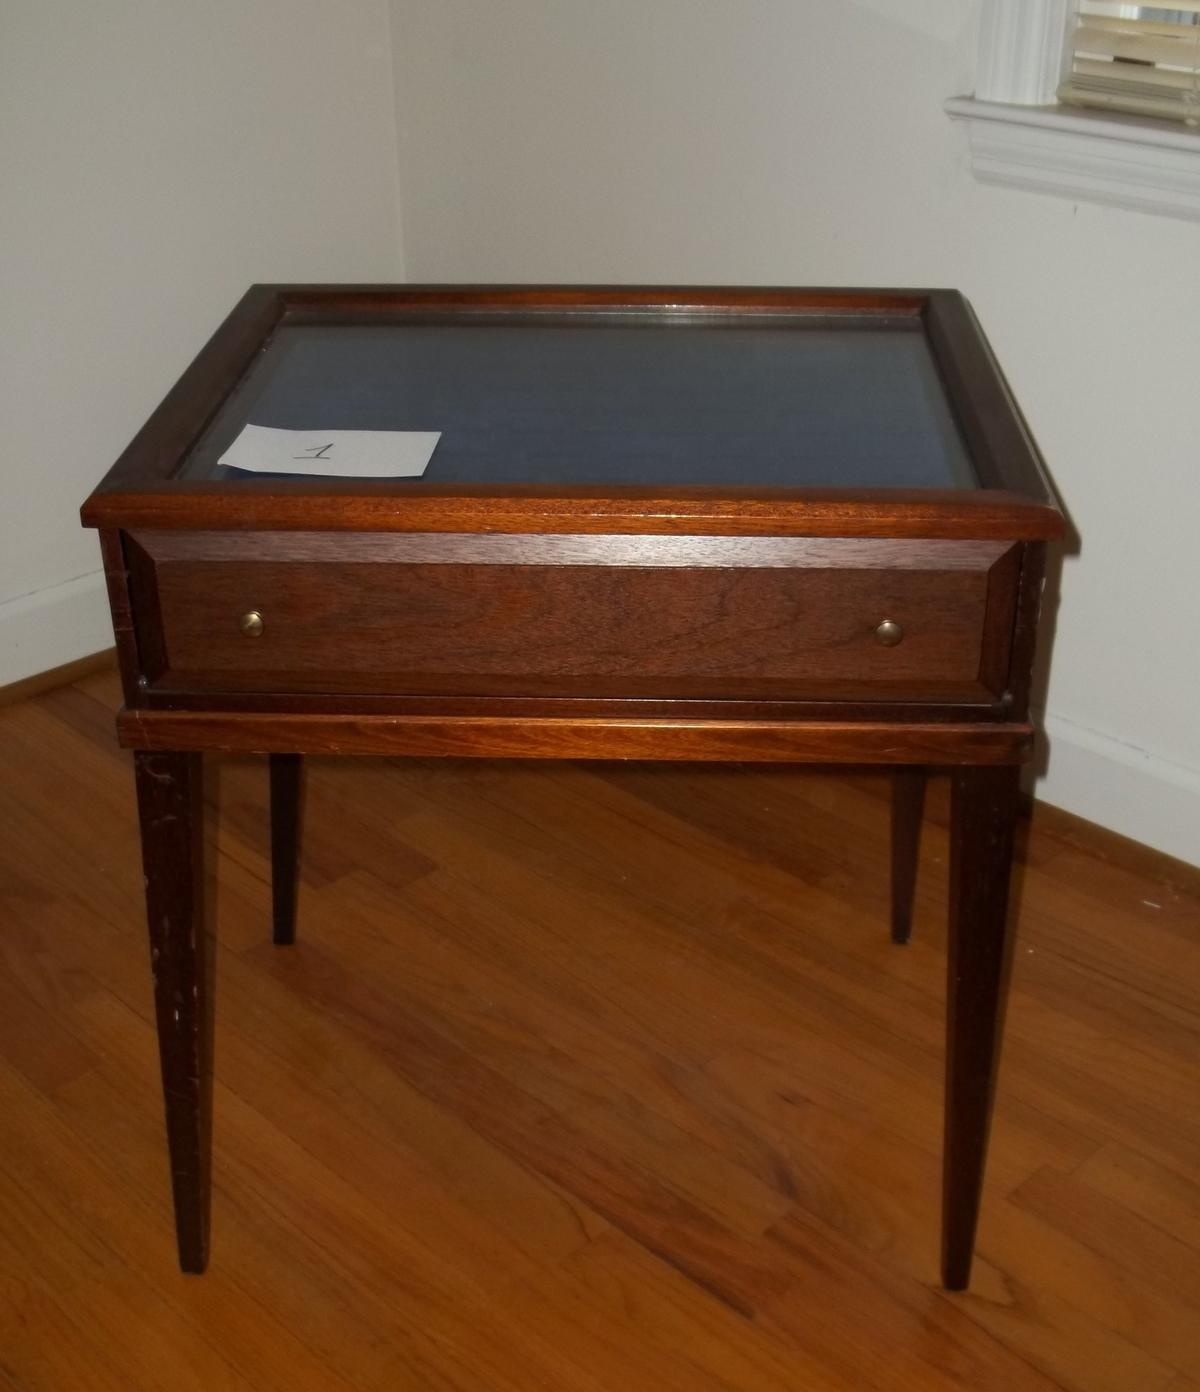 Shadow Box Style Display Side Table.